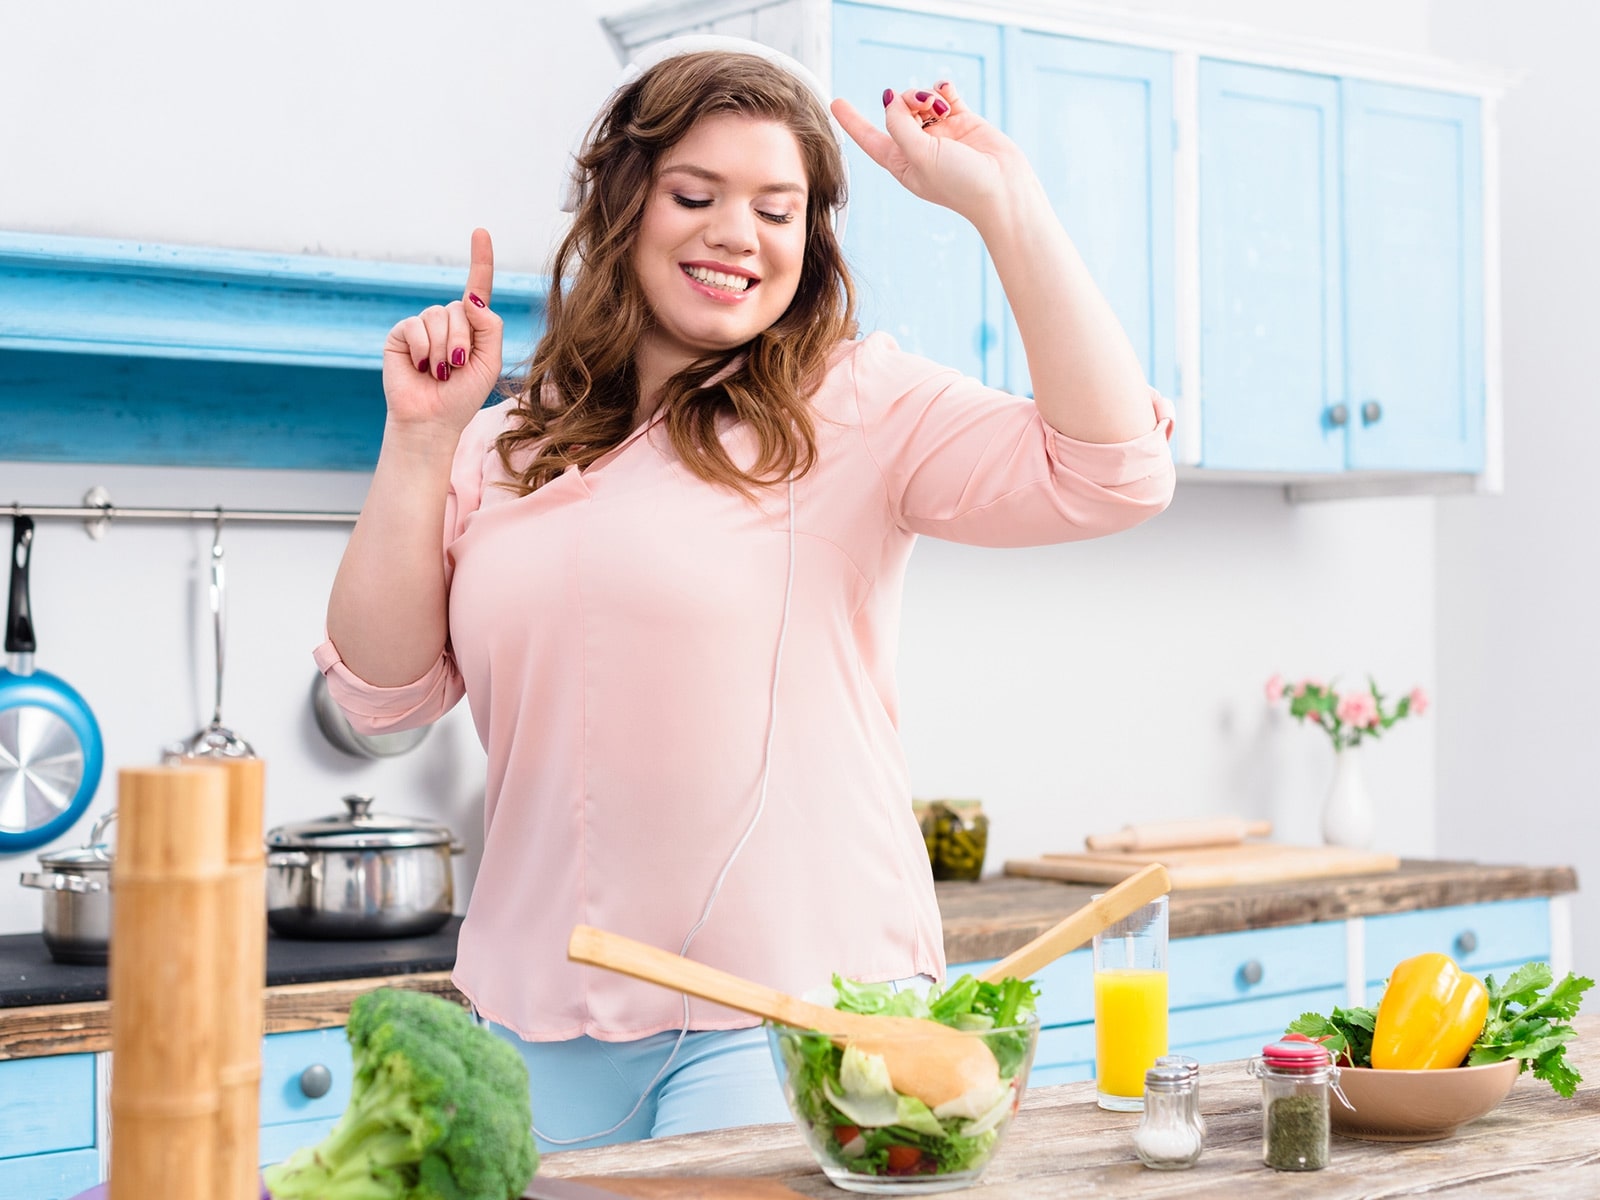 Woman happily dances while cooking a healthy meal.